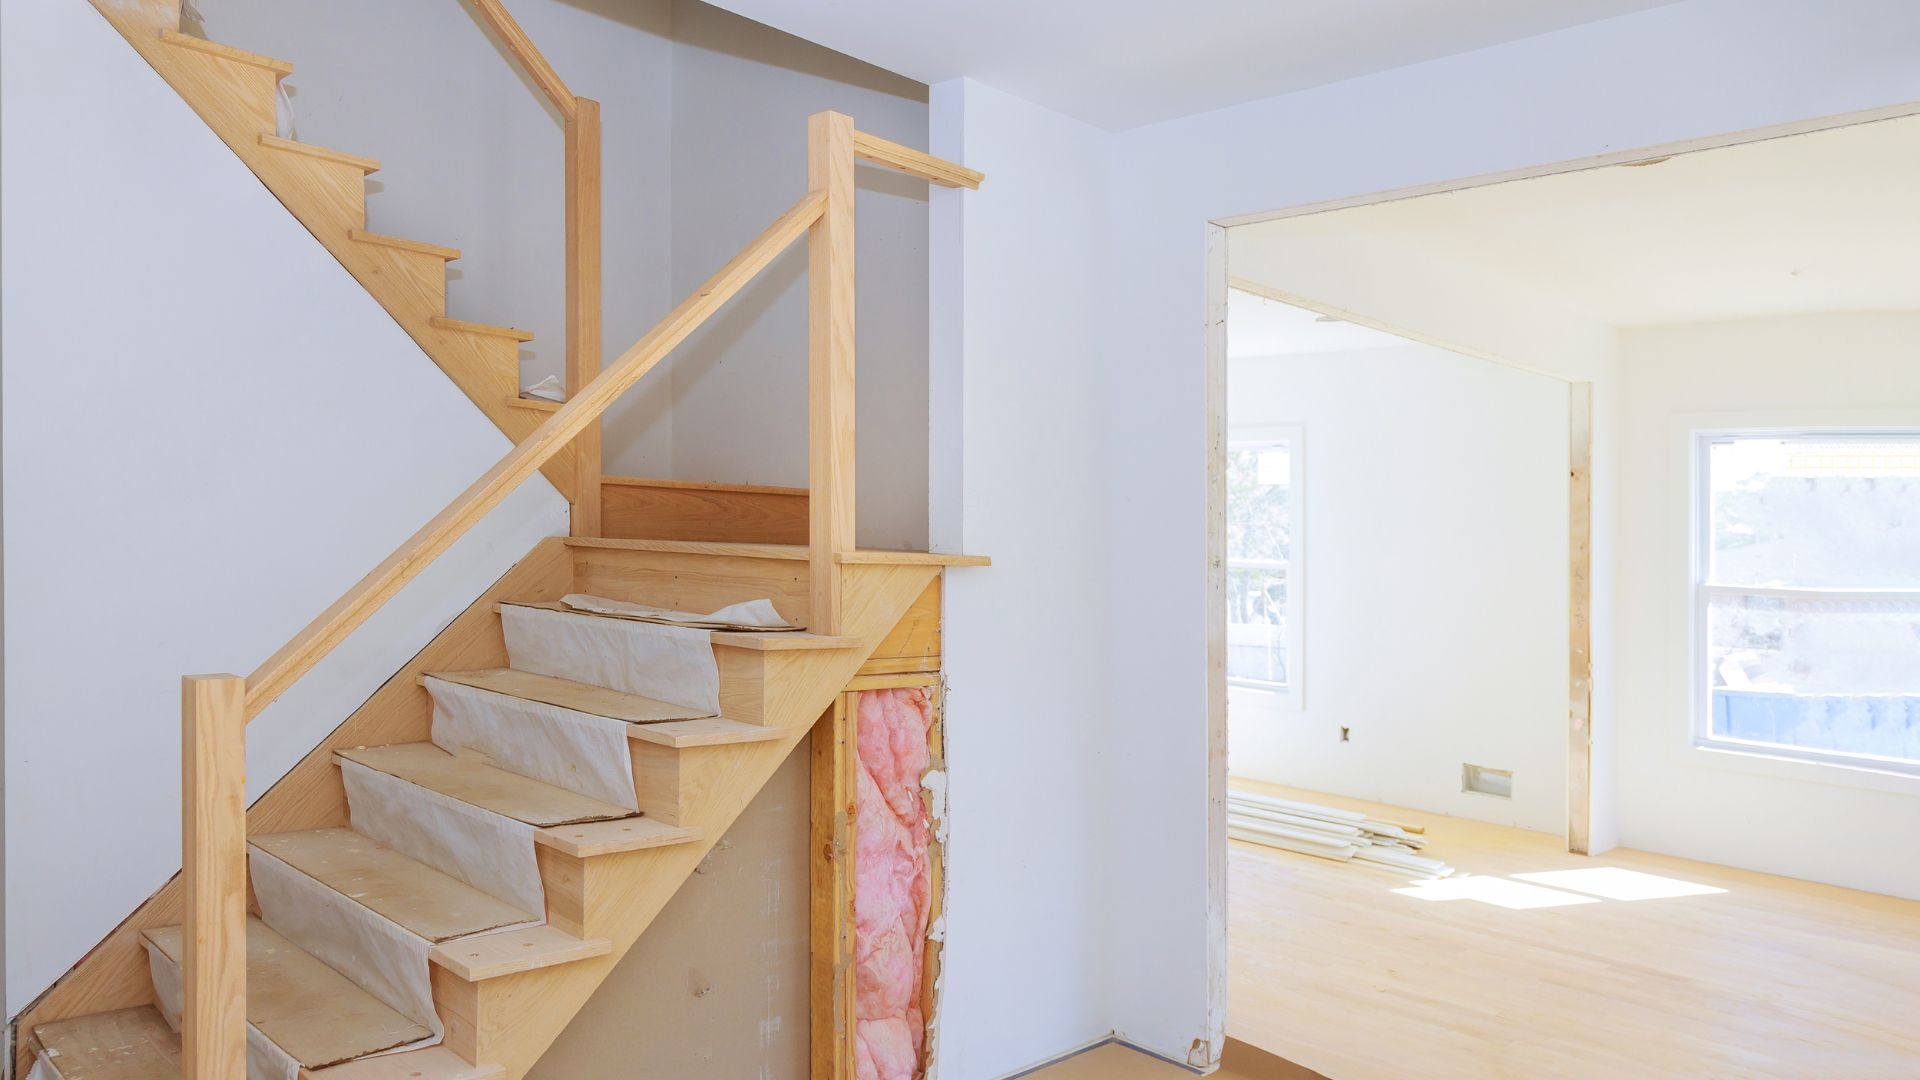 Ready for a Staircase Remodeling Project in Houston? Start Here!